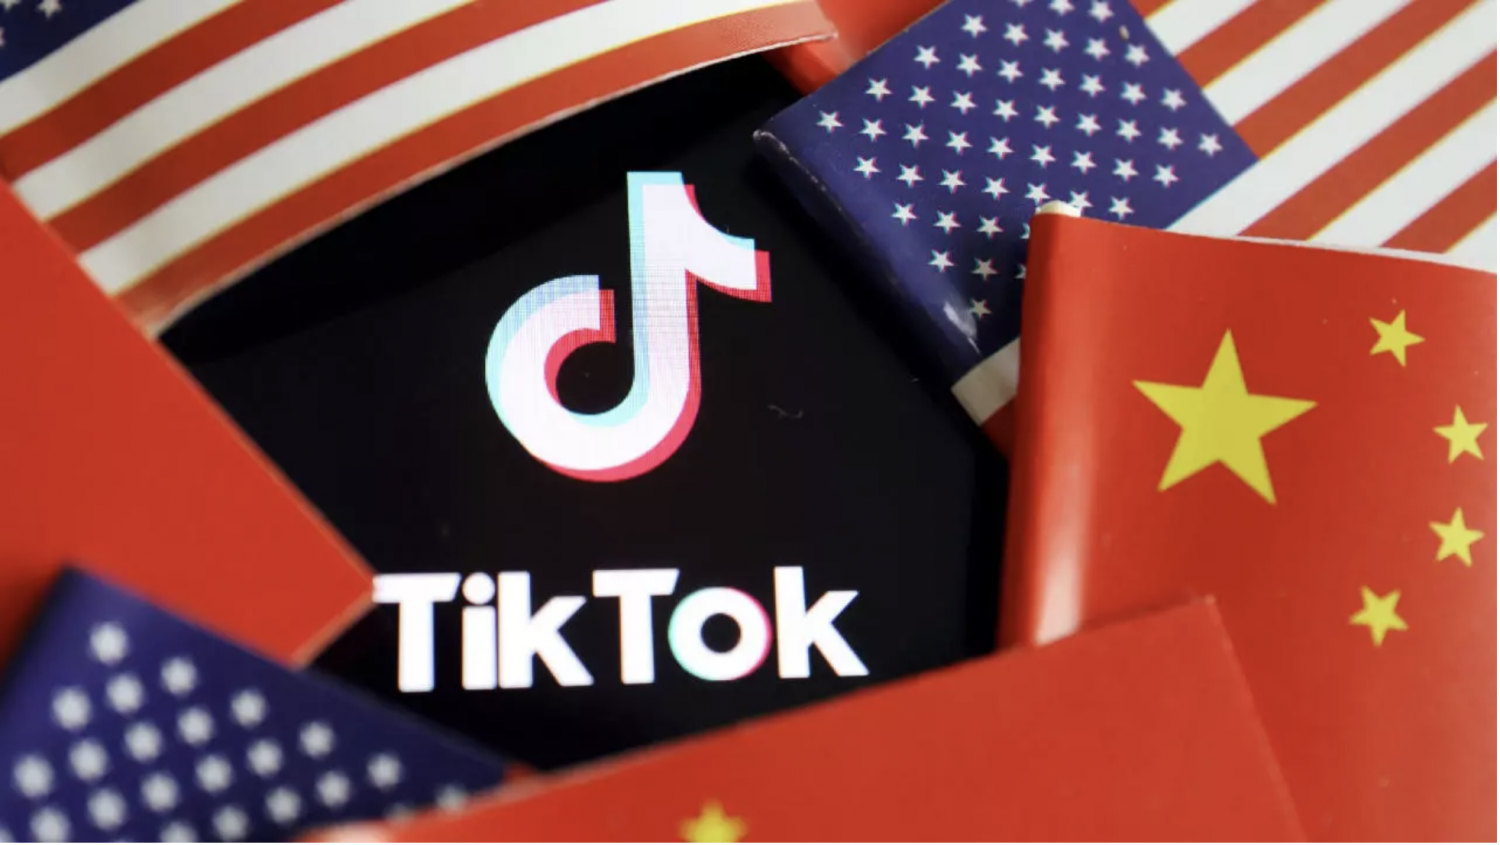 US President Donald Trump has claimed TikTok could be used by China to track the locations of federal employees, build dossiers on people for blackmail, and conduct corporate espionage. © Florence Lo, REUTERS